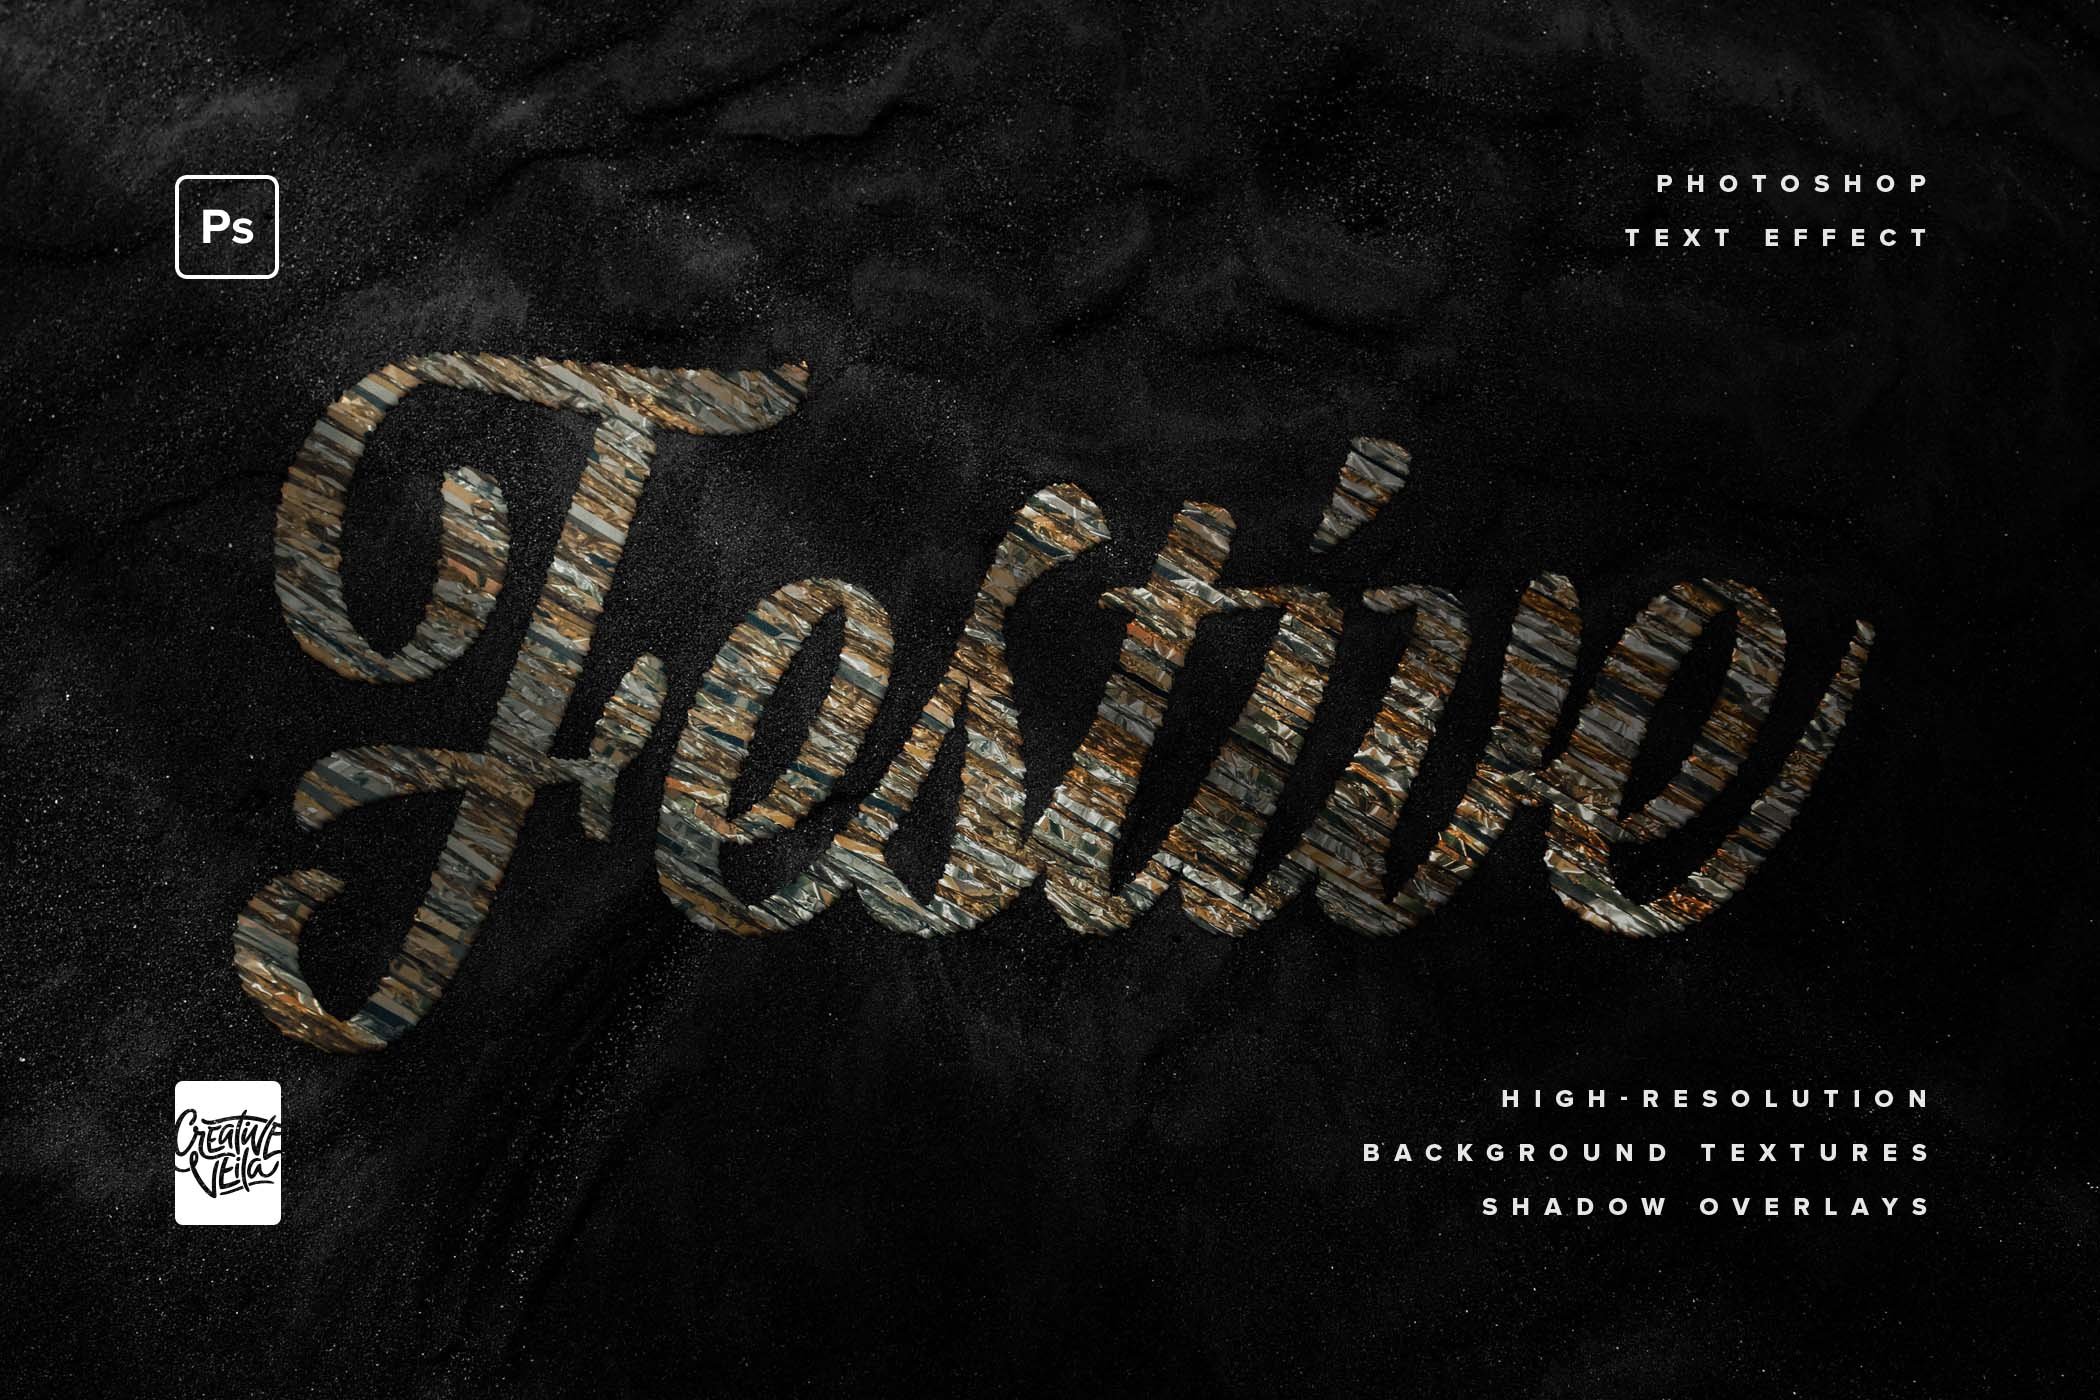 glitter photoshop text effects pack by creative veila 06 20